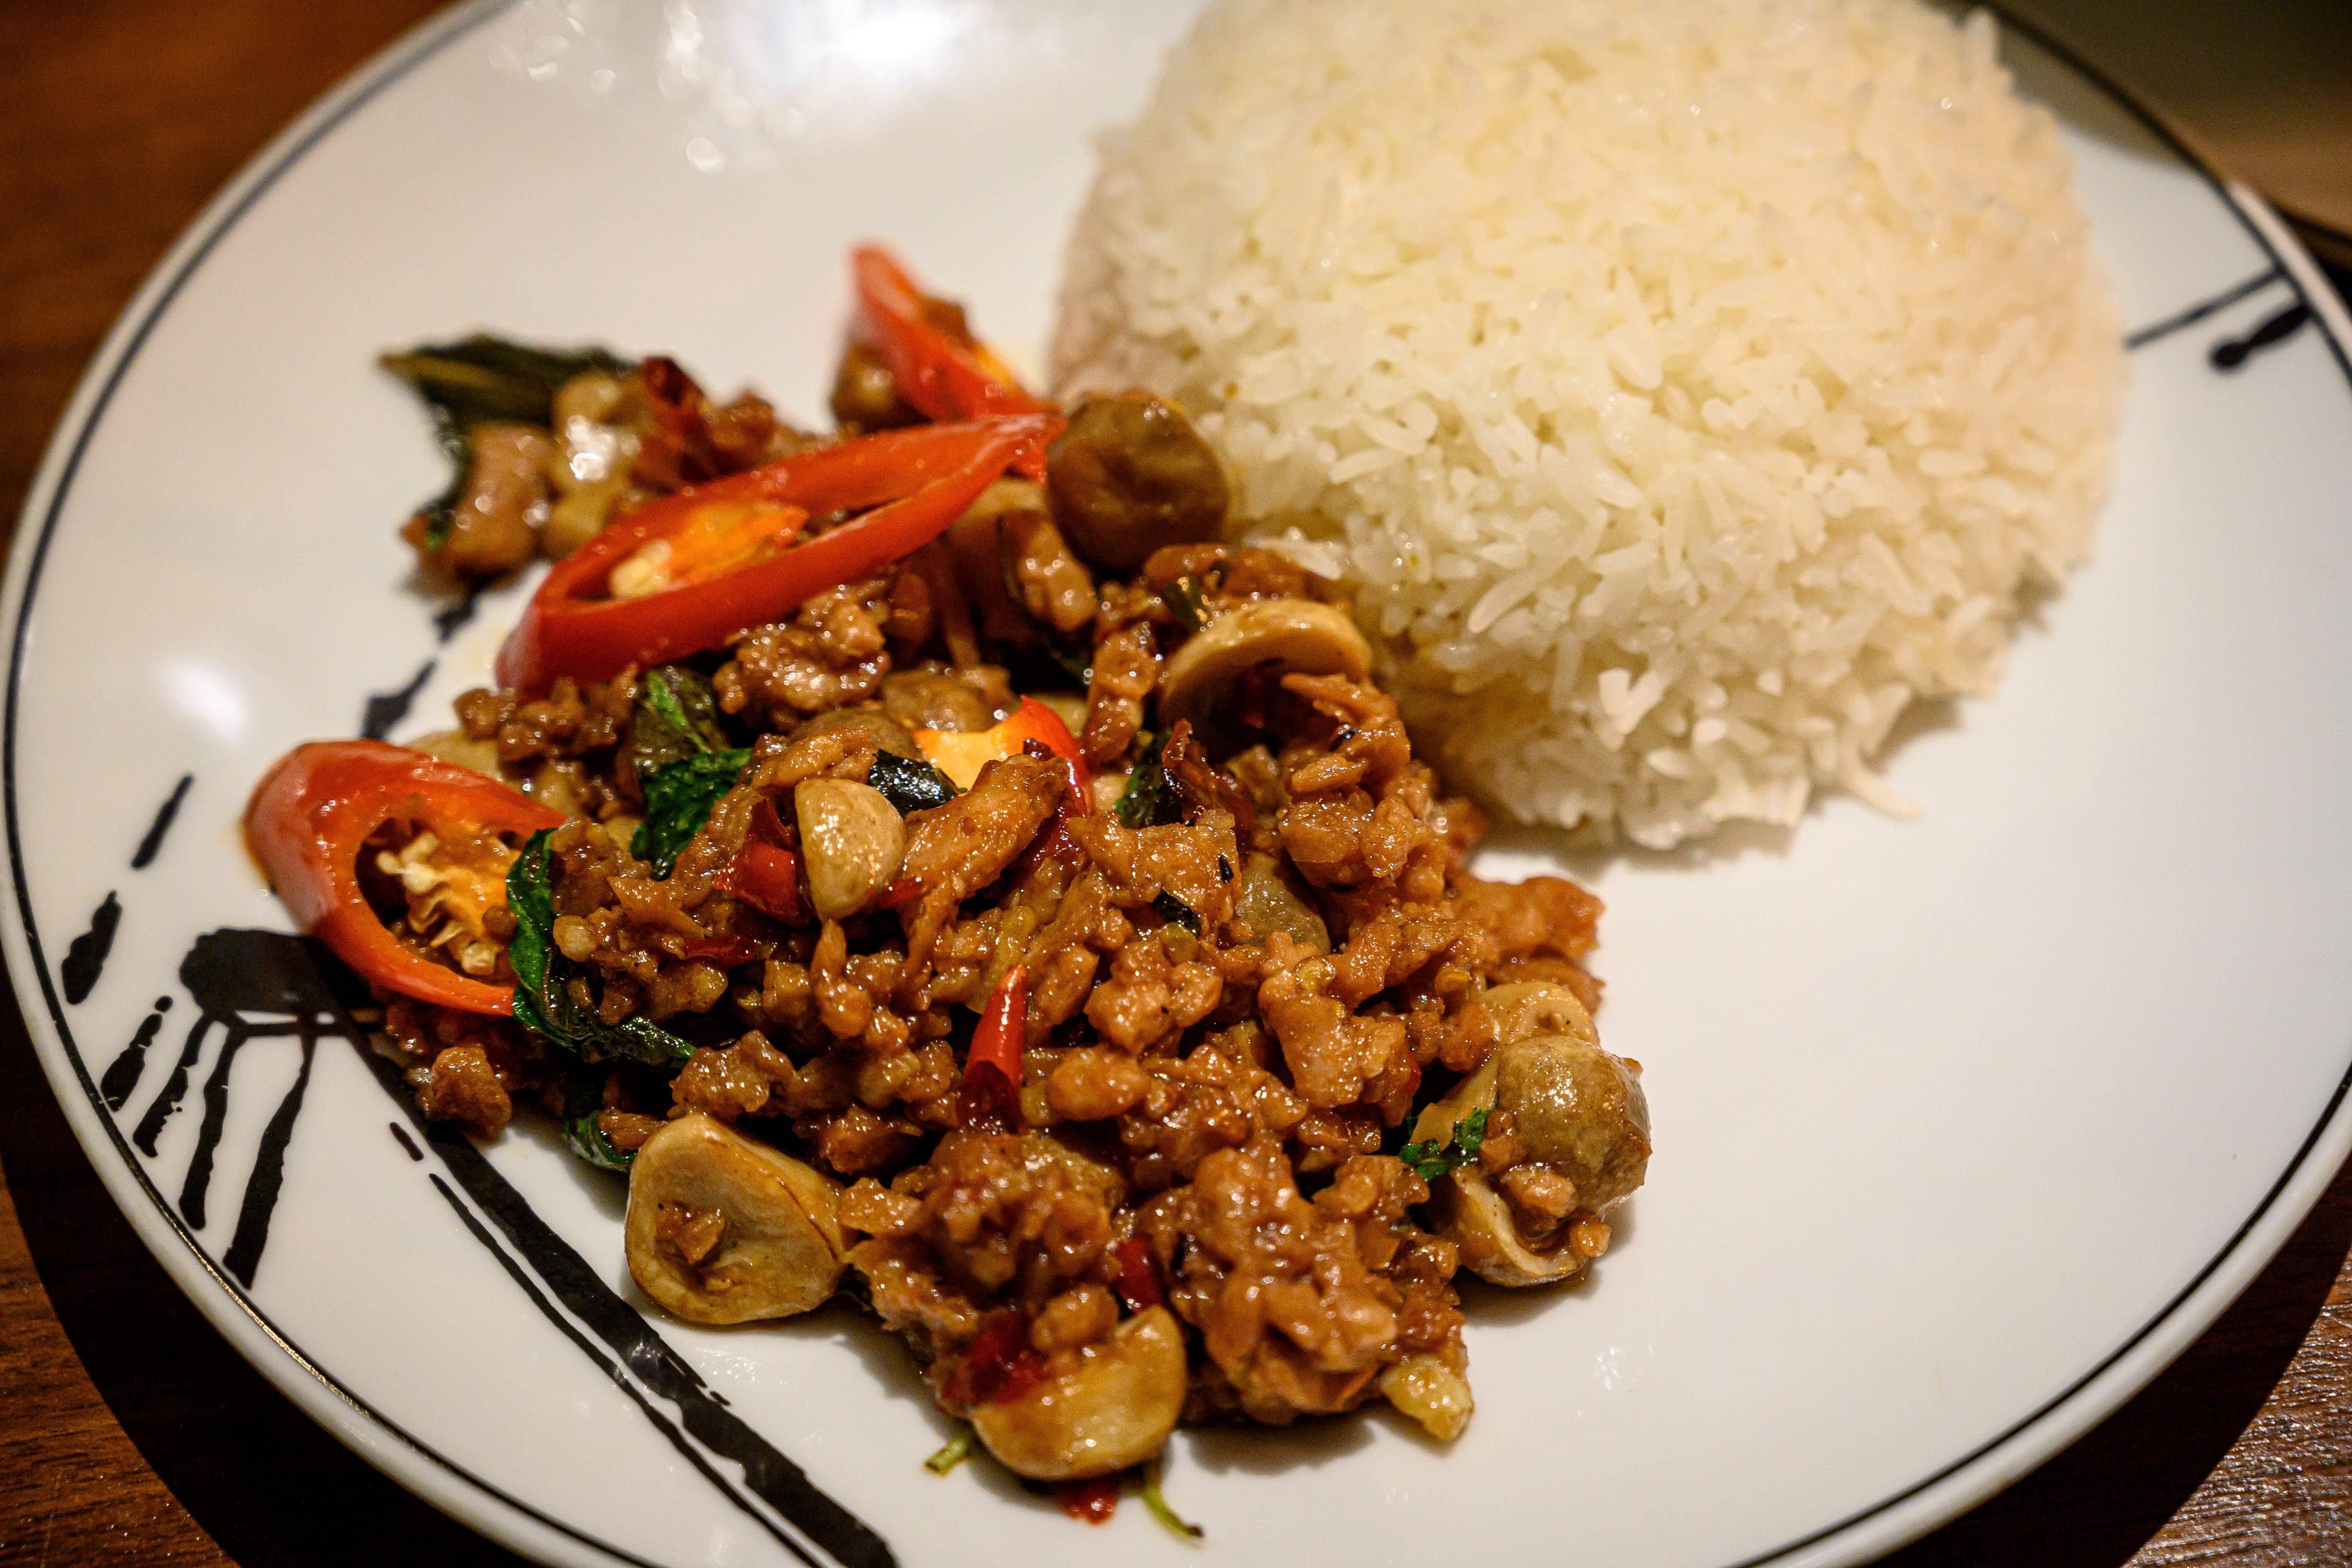 A vegetarian version of pad kra phao, using a meat substitute and stir-fried with basil and chili, served at a restaurant in Bangkok